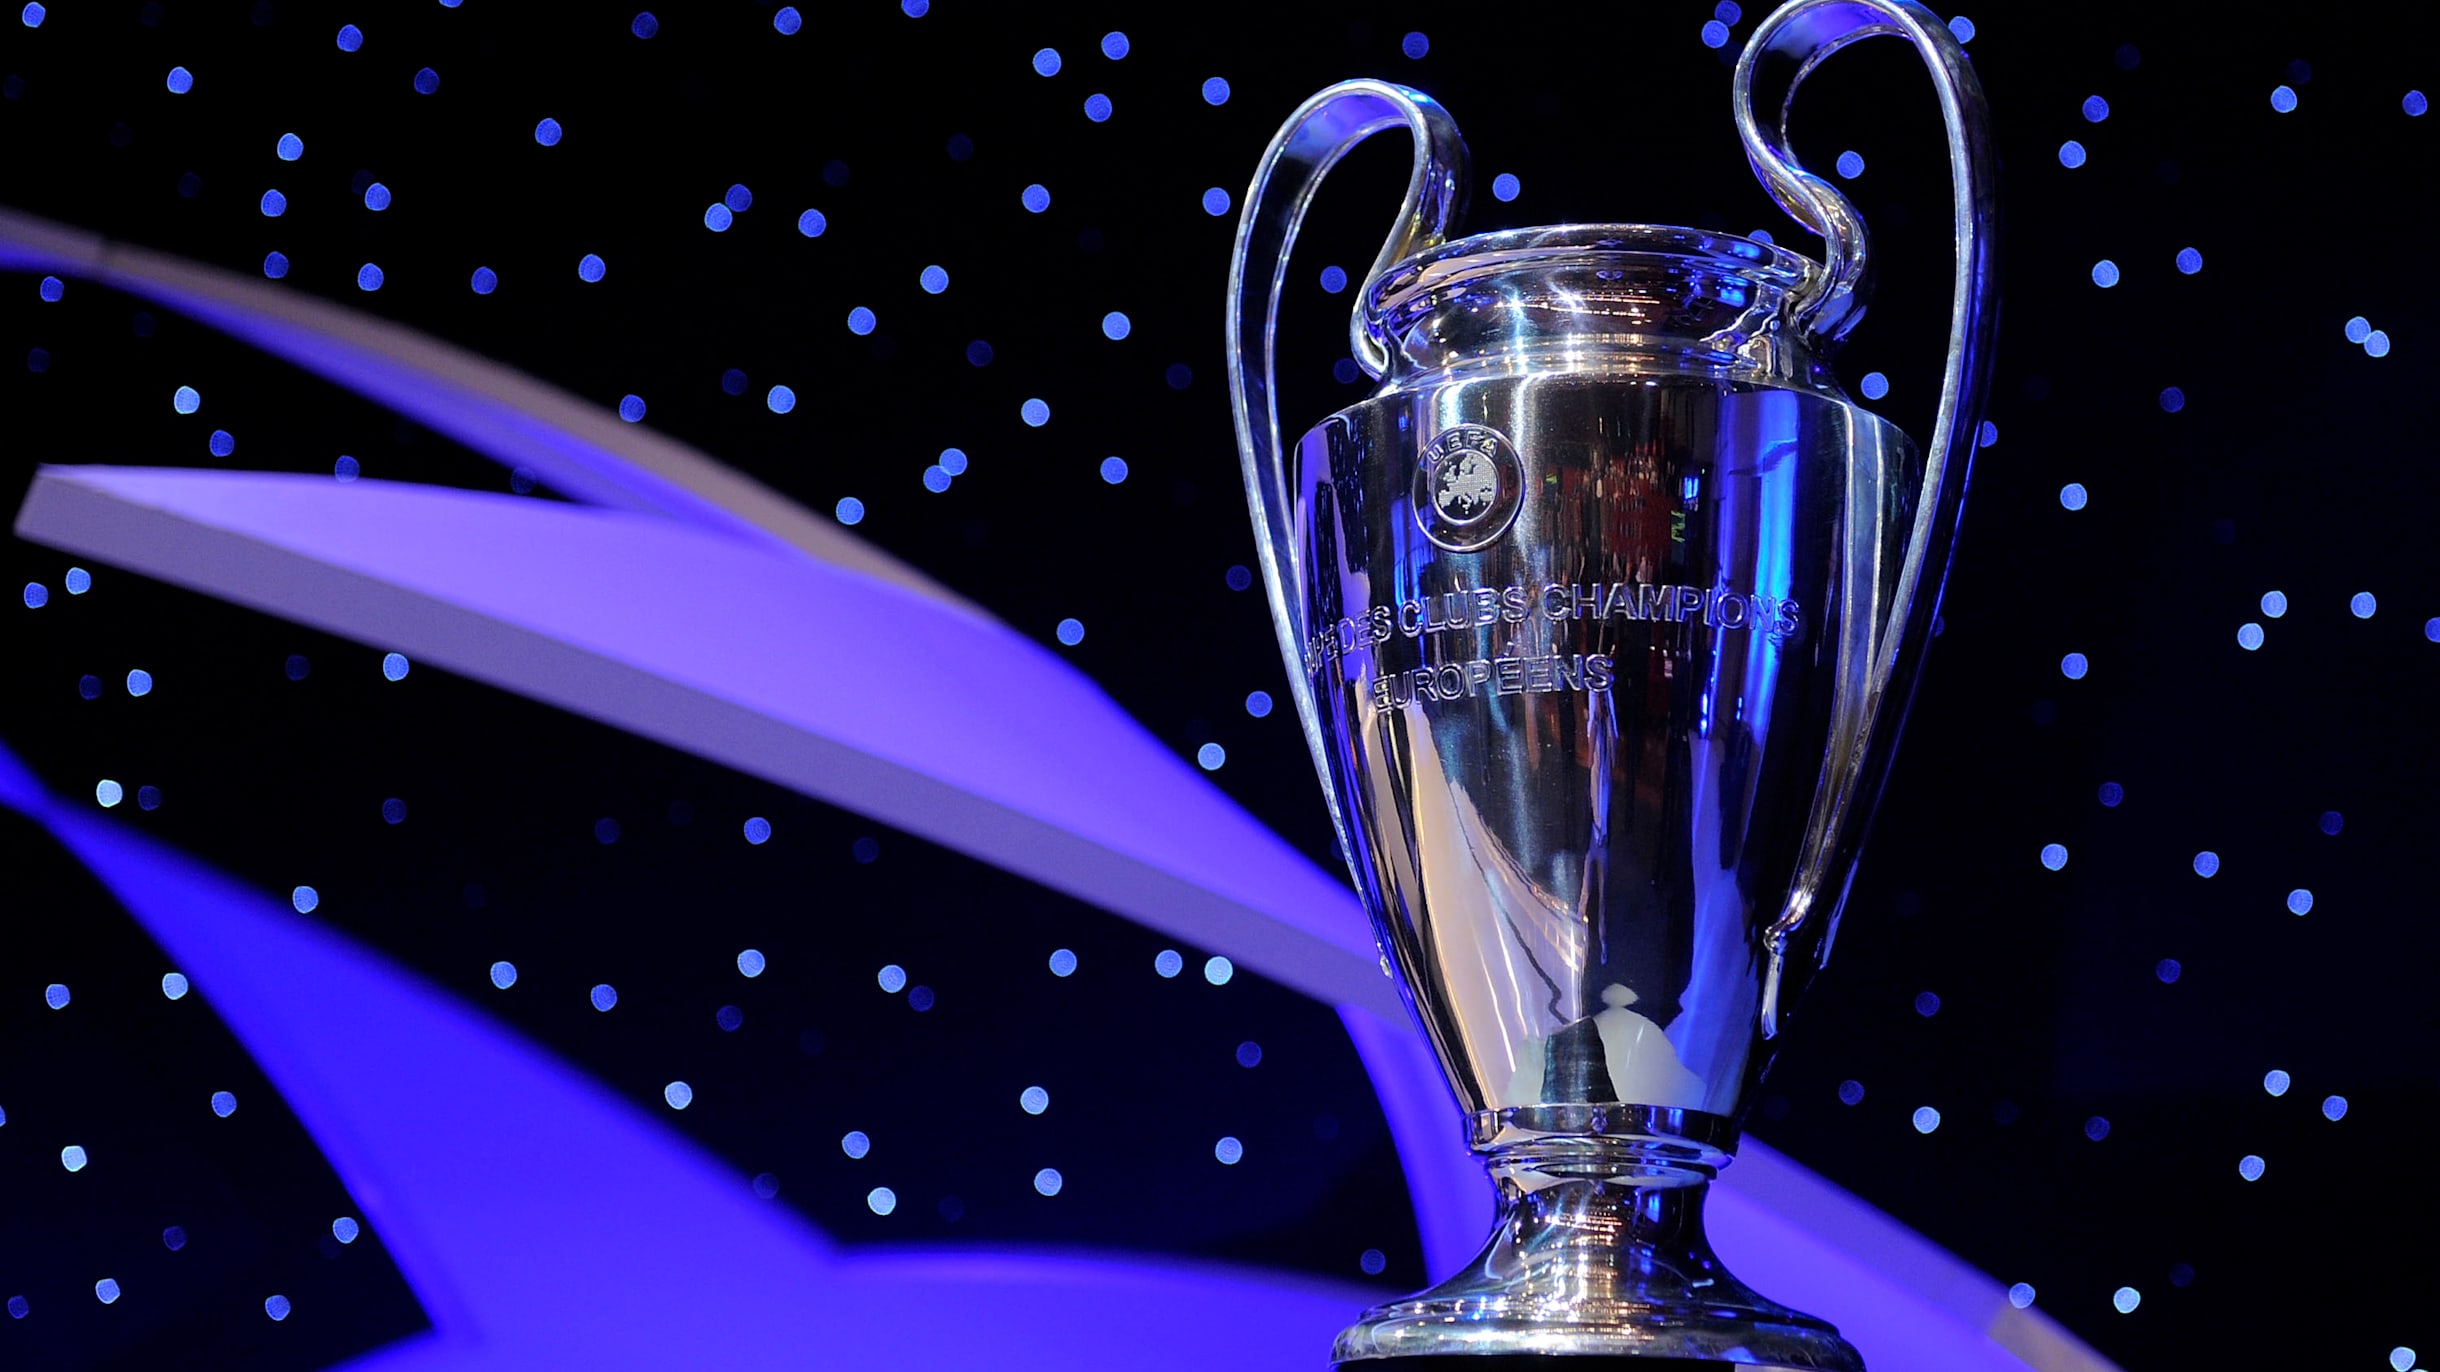 UEFA Champions League 2022-23 quarter-final draw Watch live streaming and telecast in India